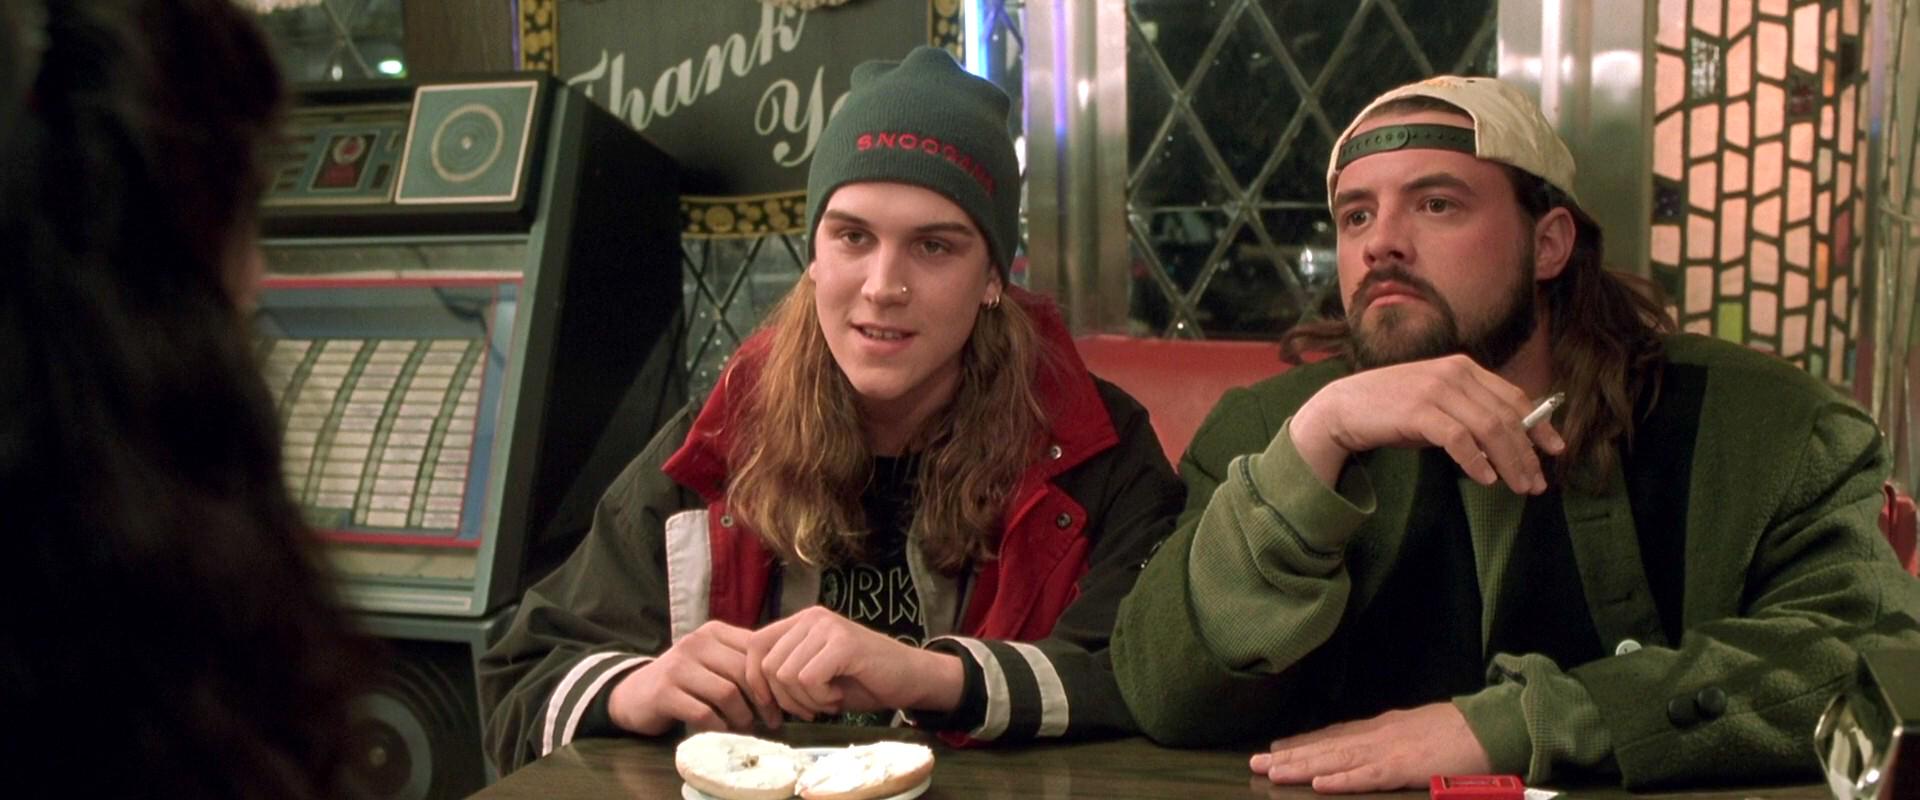 Happy Birthday to Jason Mewes, who turns 41 today! 